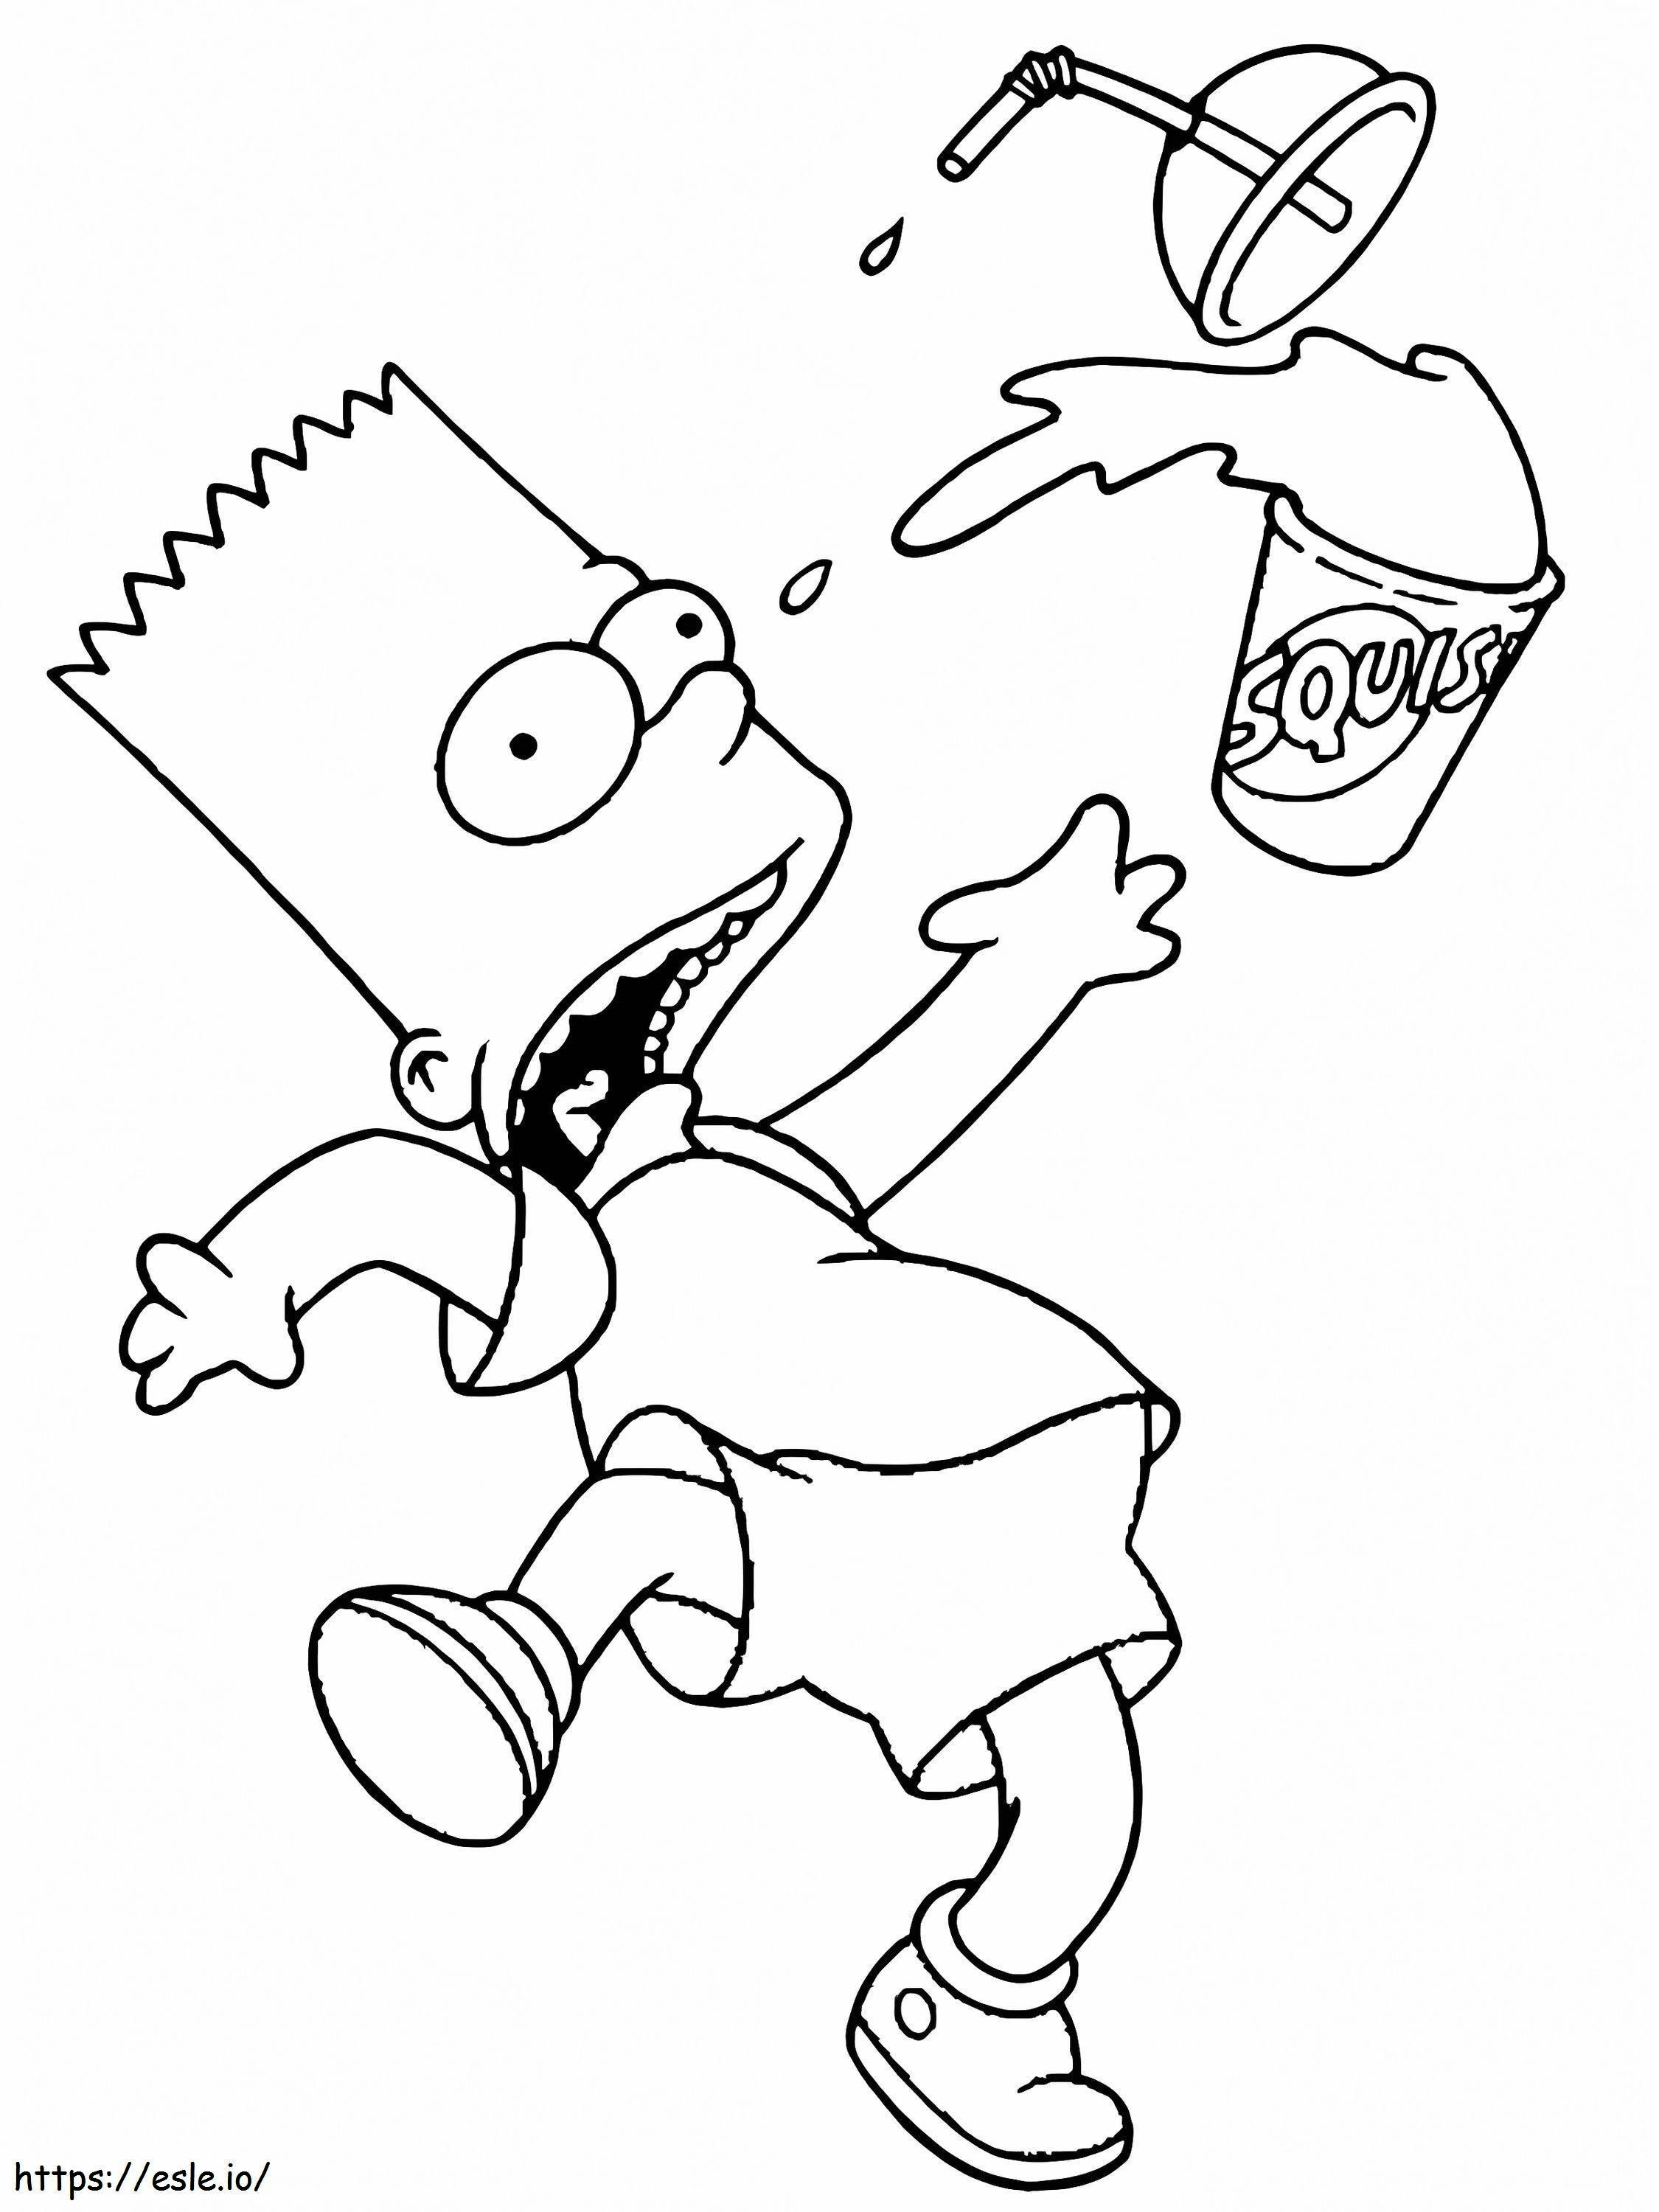 Fear Of Bart Simpson coloring page